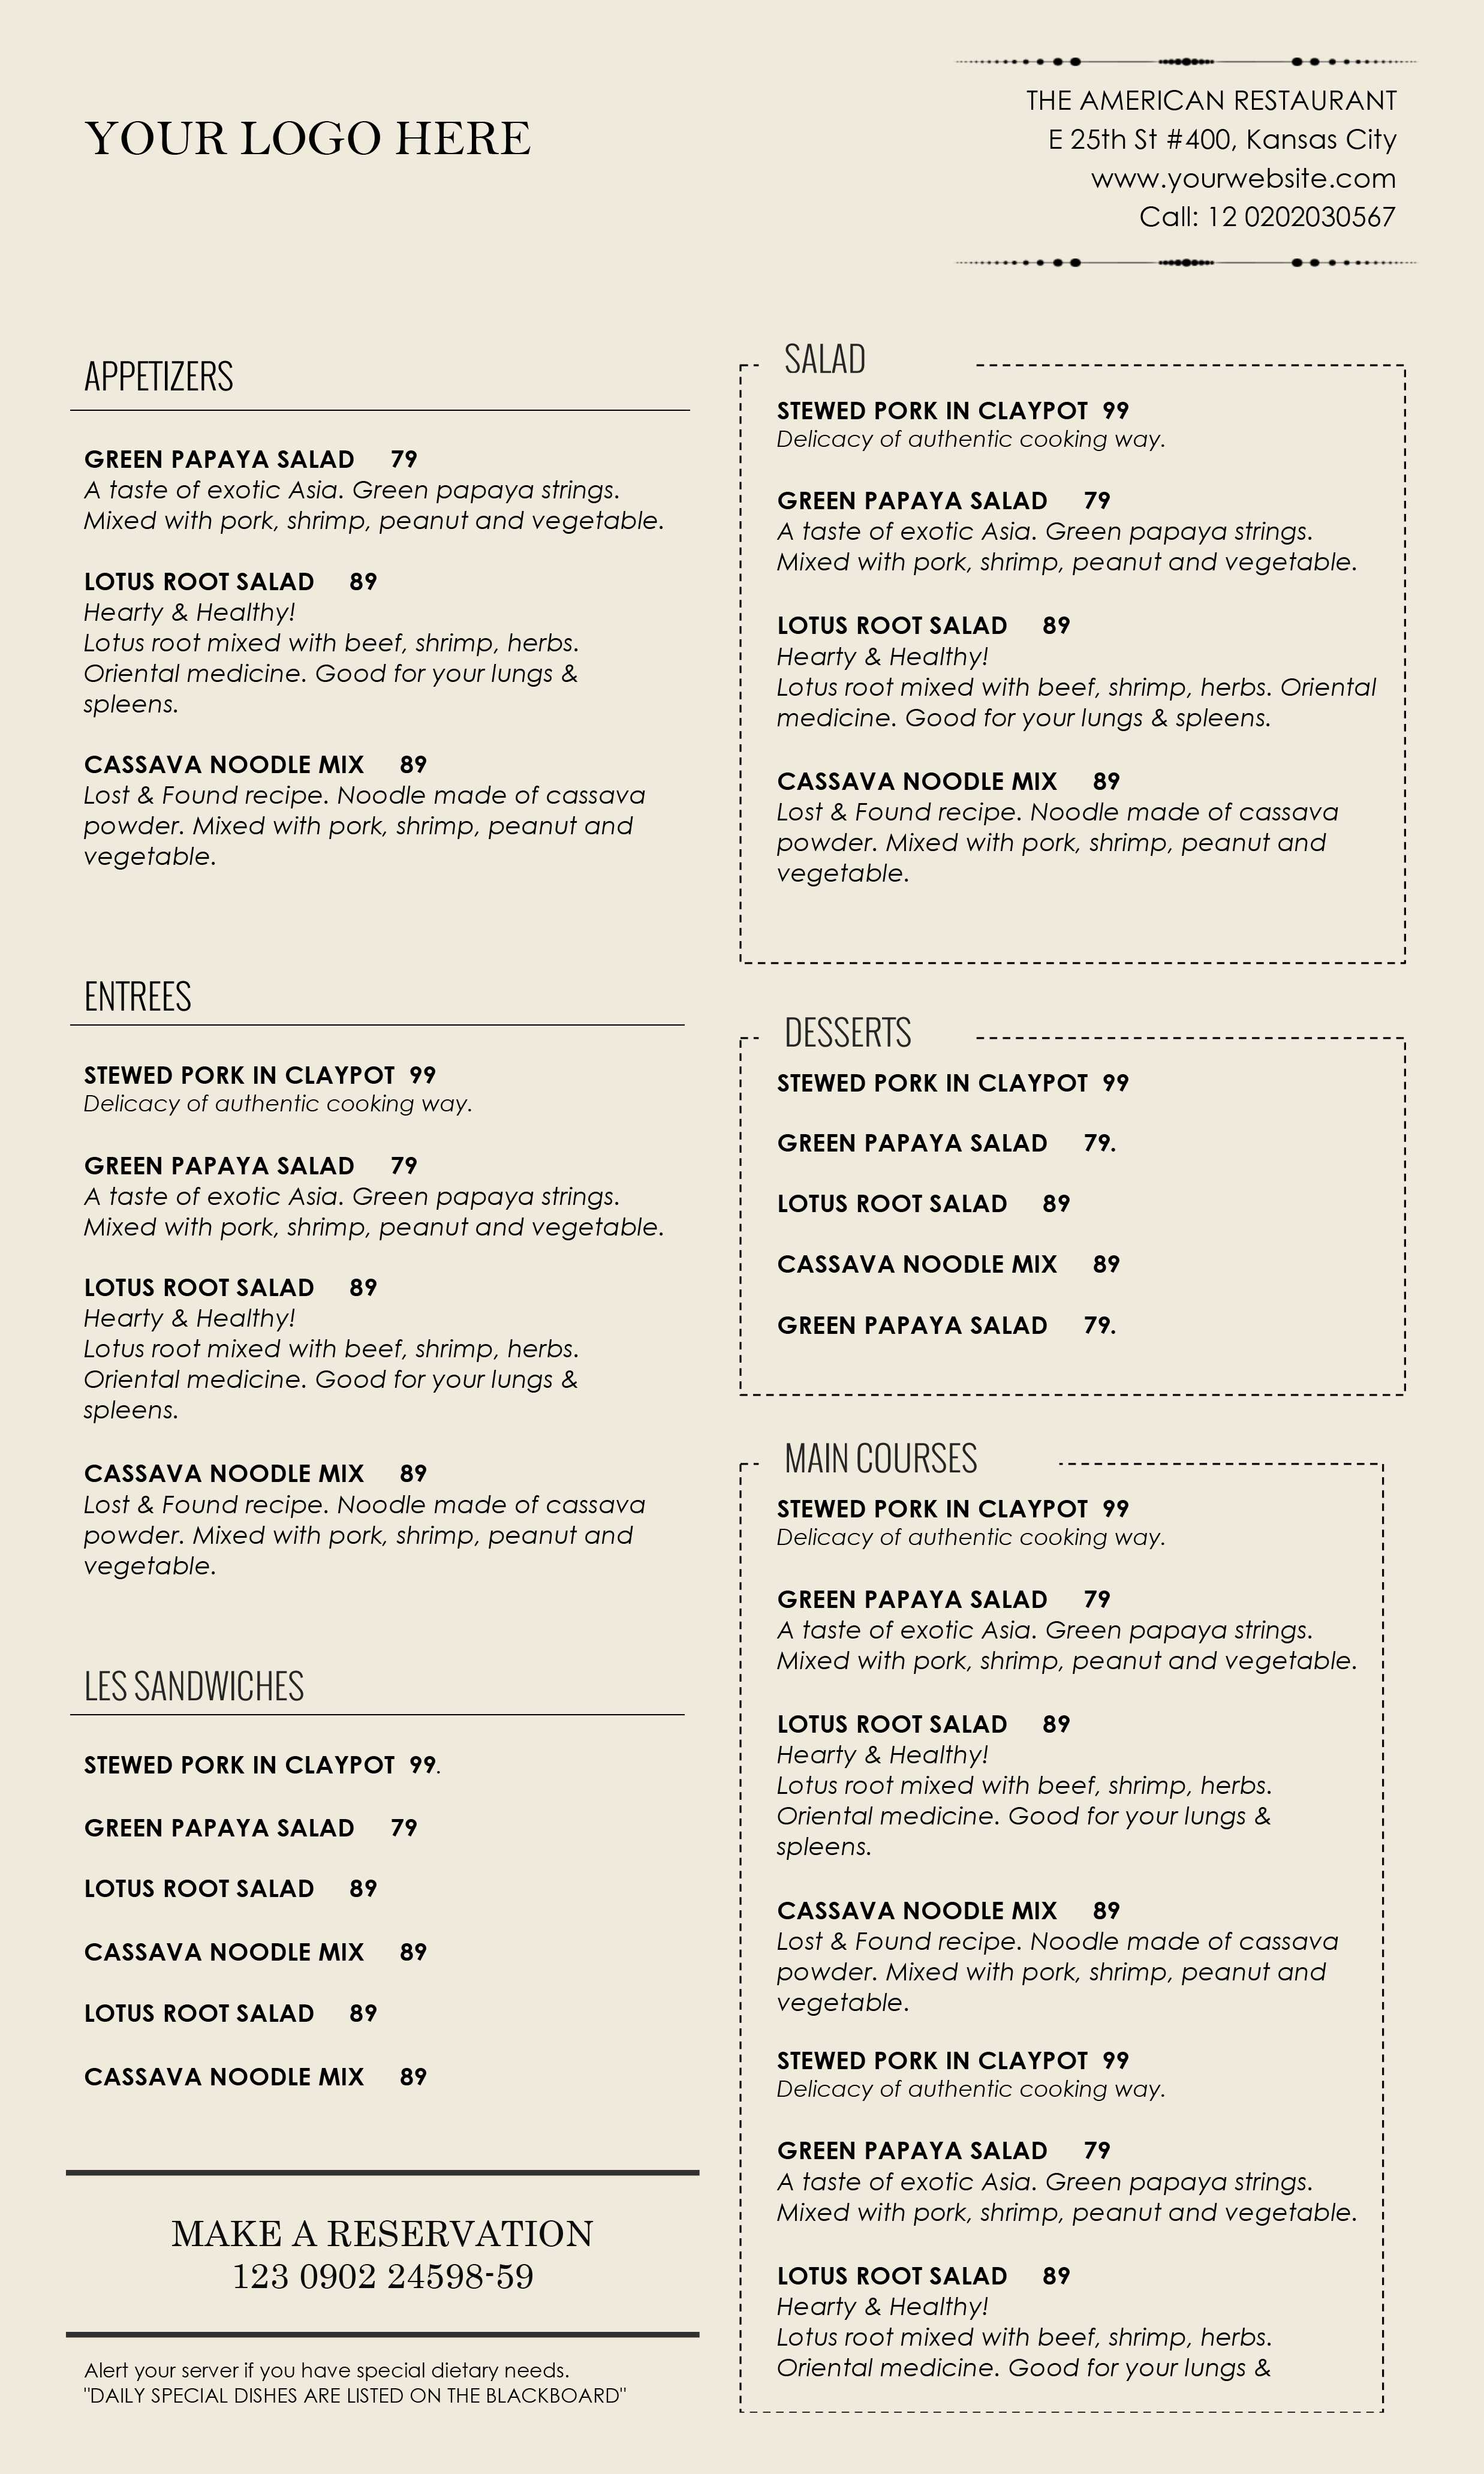 Free Cafe Menu Templates For Word - Atlantaauctionco In Free Cafe Menu Templates For Word